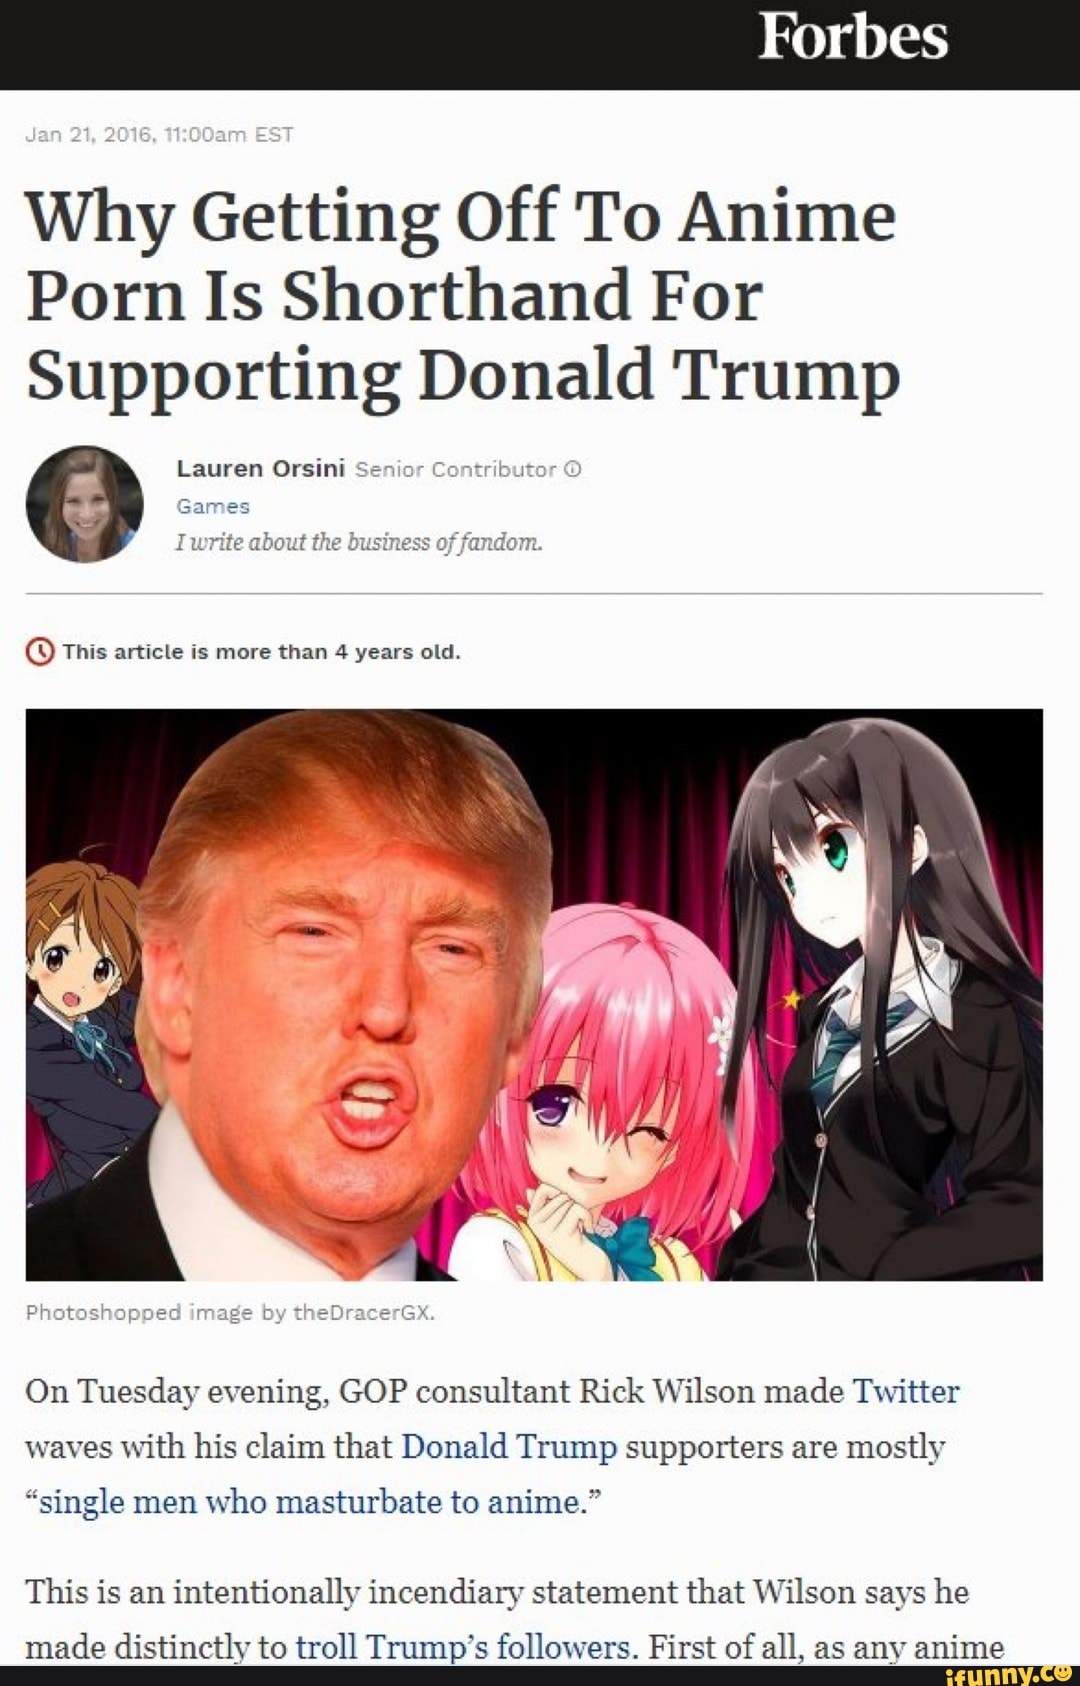 Anime Porn 2016 - Korbes Jan 21, EST Why Getting Off To Anime Porn Is Shorthand For  Supporting Donald Trump